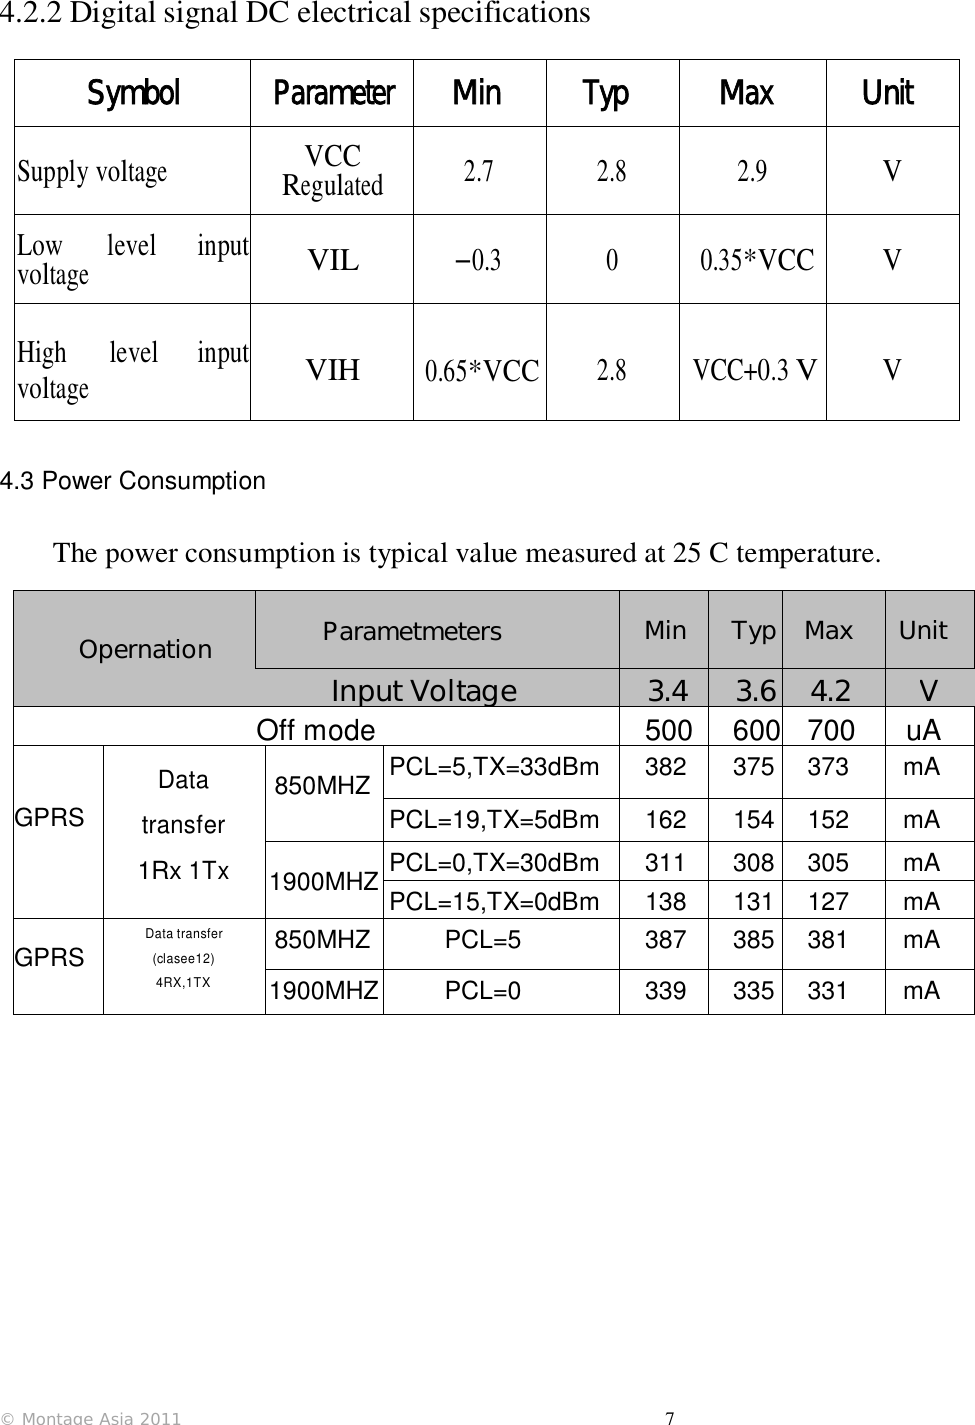                         © Montage Asia 2011                                       7  4.2.2 Digital signal DC electrical specifications  Symbol Parameter Min Typ Max Unit Supply voltage VCC Regulated 2.7 2.8 2.9 V Low  level  inputvoltage VIL —0.3 0 0.35*VCC V  High  level  inputvoltage  VIH   0.65*VCC  2.8  VCC+0.3 V  V  4.3 Power Consumption  The power consumption is typical value measured at 25 C temperature.    Opernation   Min  Typ  Max  Unit Parametmeters  Input Voltage 3.4 3.6 4.2 V Off mode 500 600700 uA    GPRS  Data transfer 1Rx 1Tx  850MHZ PCL=5,TX=33dBm 382 375 373 mA PCL=19,TX=5dBm 162 154 152 mA  1900MHZ PCL=0,TX=30dBm 311 308 305 mA PCL=15,TX=0dBm 138 131 127 mA  GPRS Data transfer (clasee12) 4RX,1TX 850MHZ PCL=5 387 385 381 mA 1900MHZ PCL=0 339 335 331 mA  